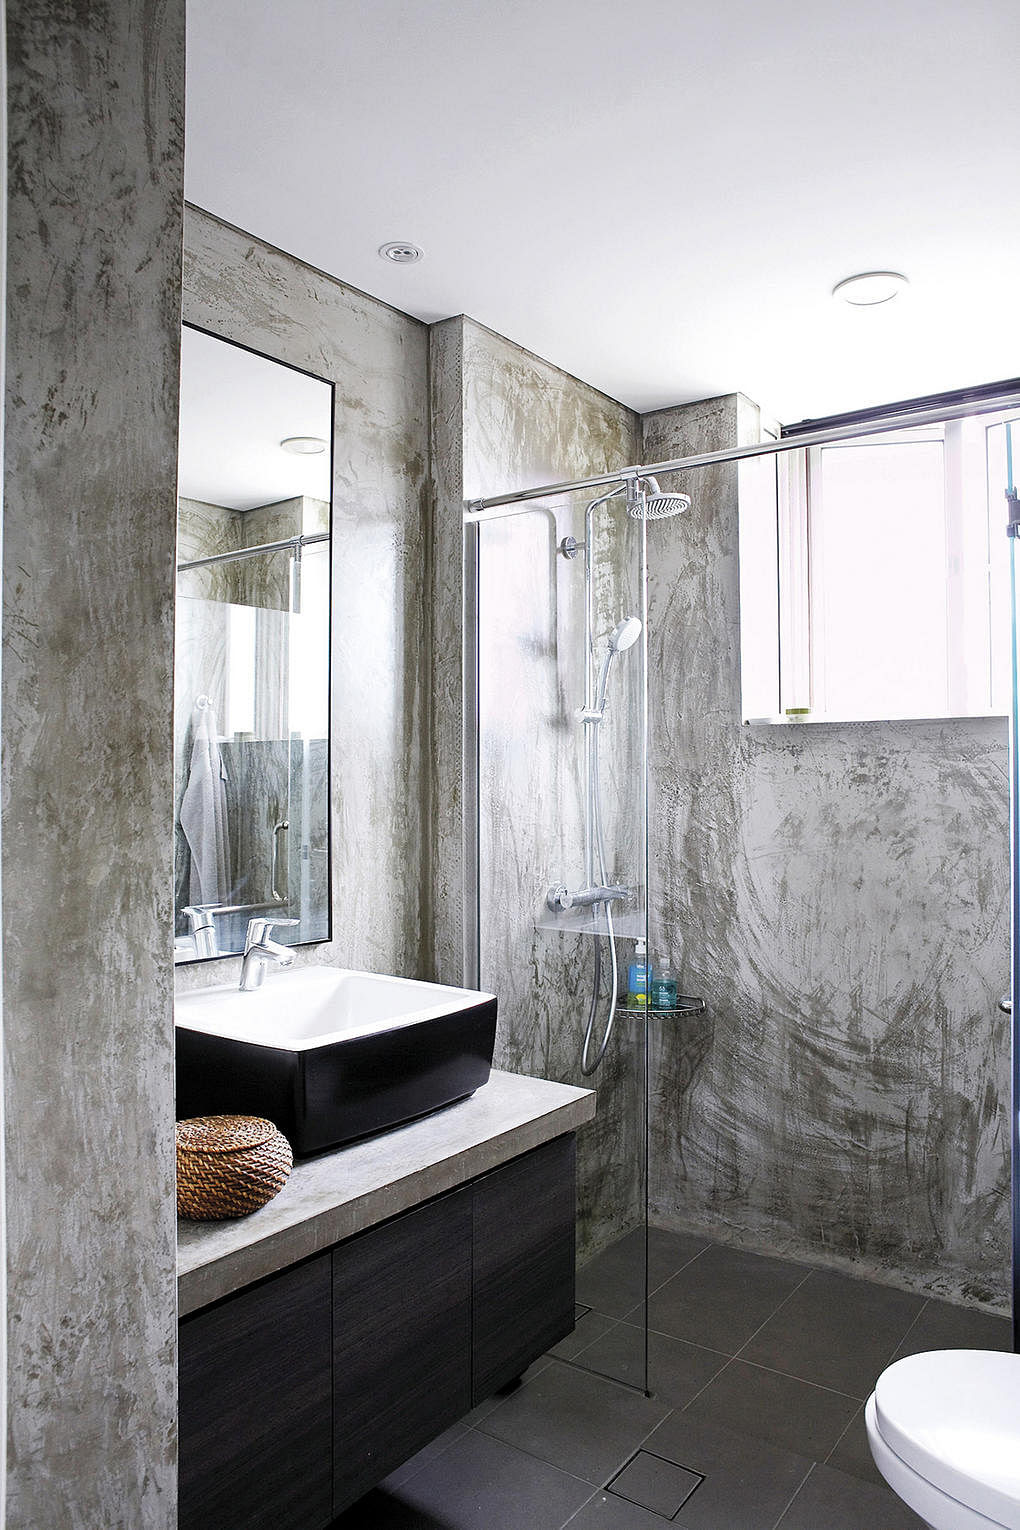 Bathroom design ideas: 7 material finishes for walls and ...